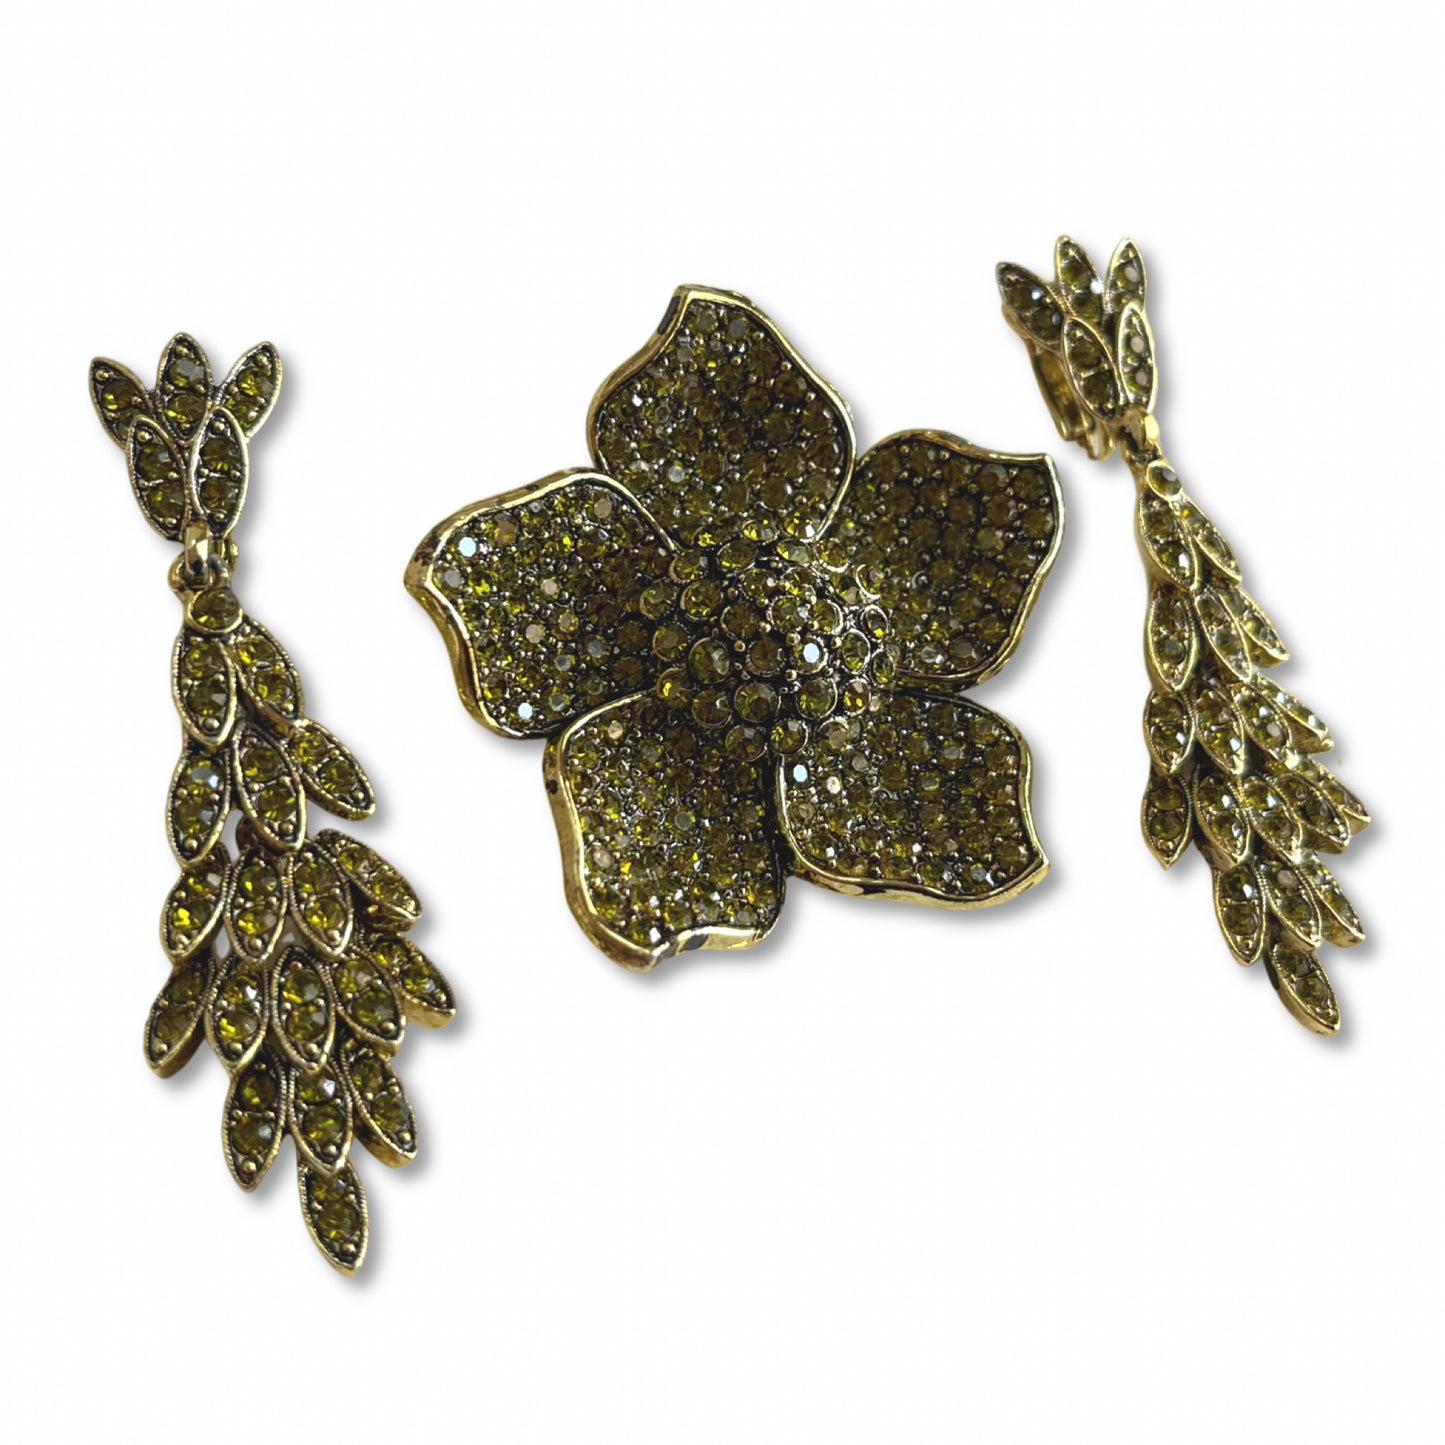 VJ-9042 HollyCraft Olive colored flower brooch and earrings